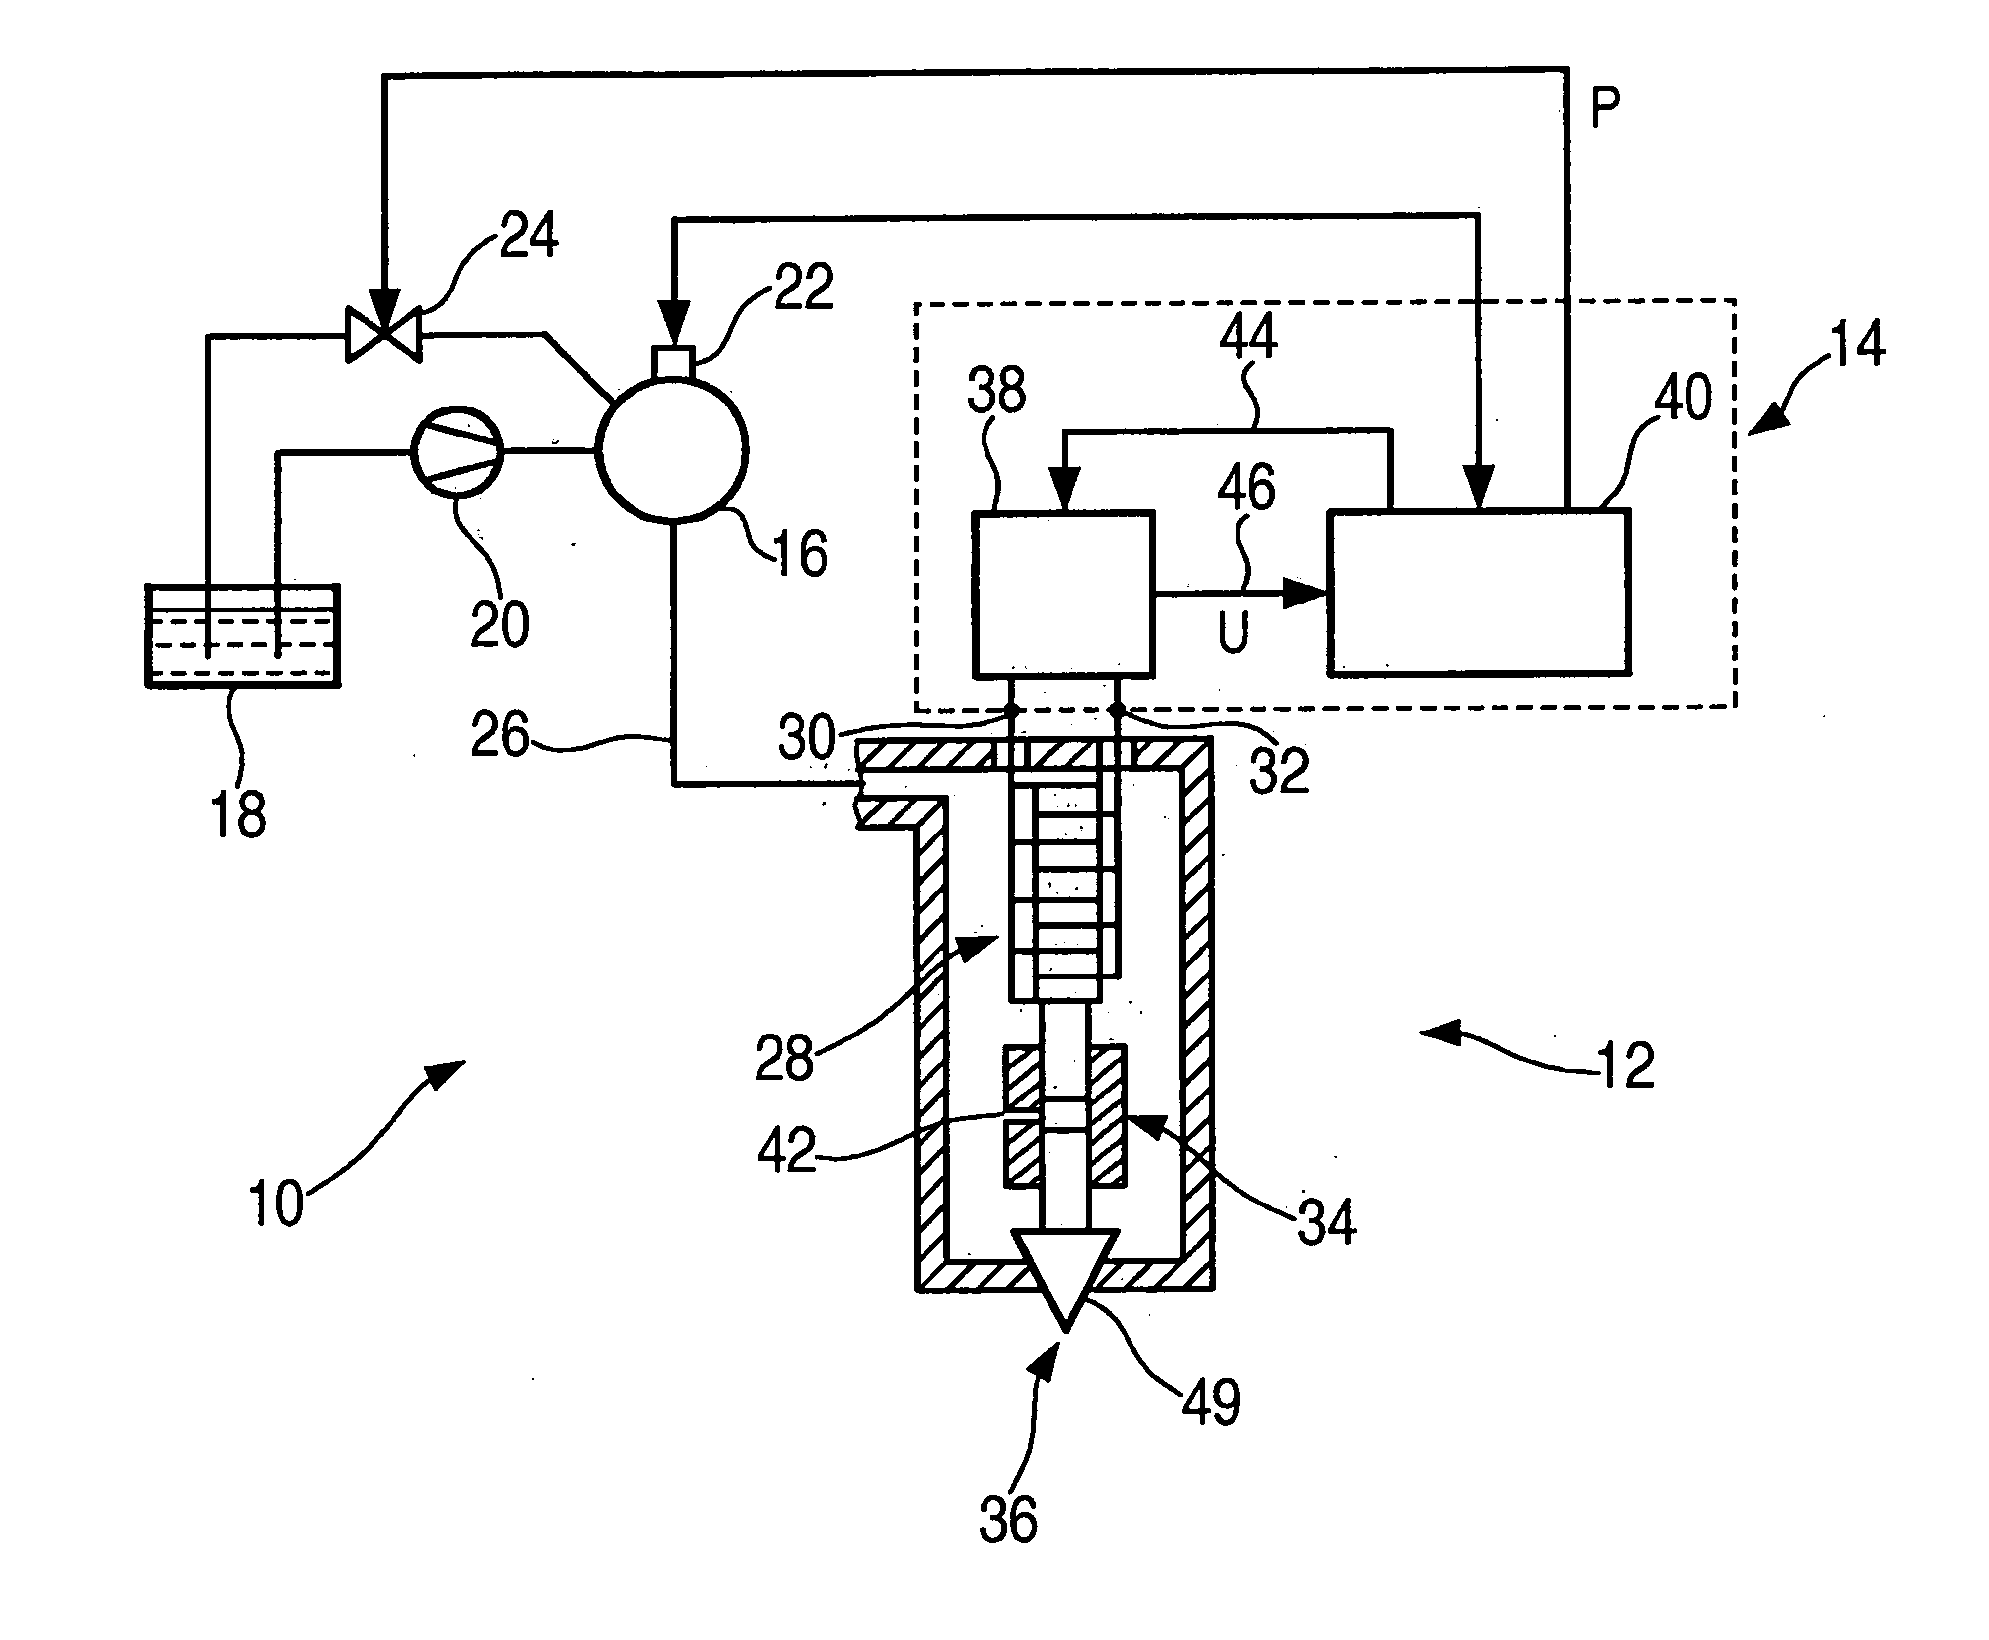 Method for Determining an Opening Voltage of a Piezoelectric Injector